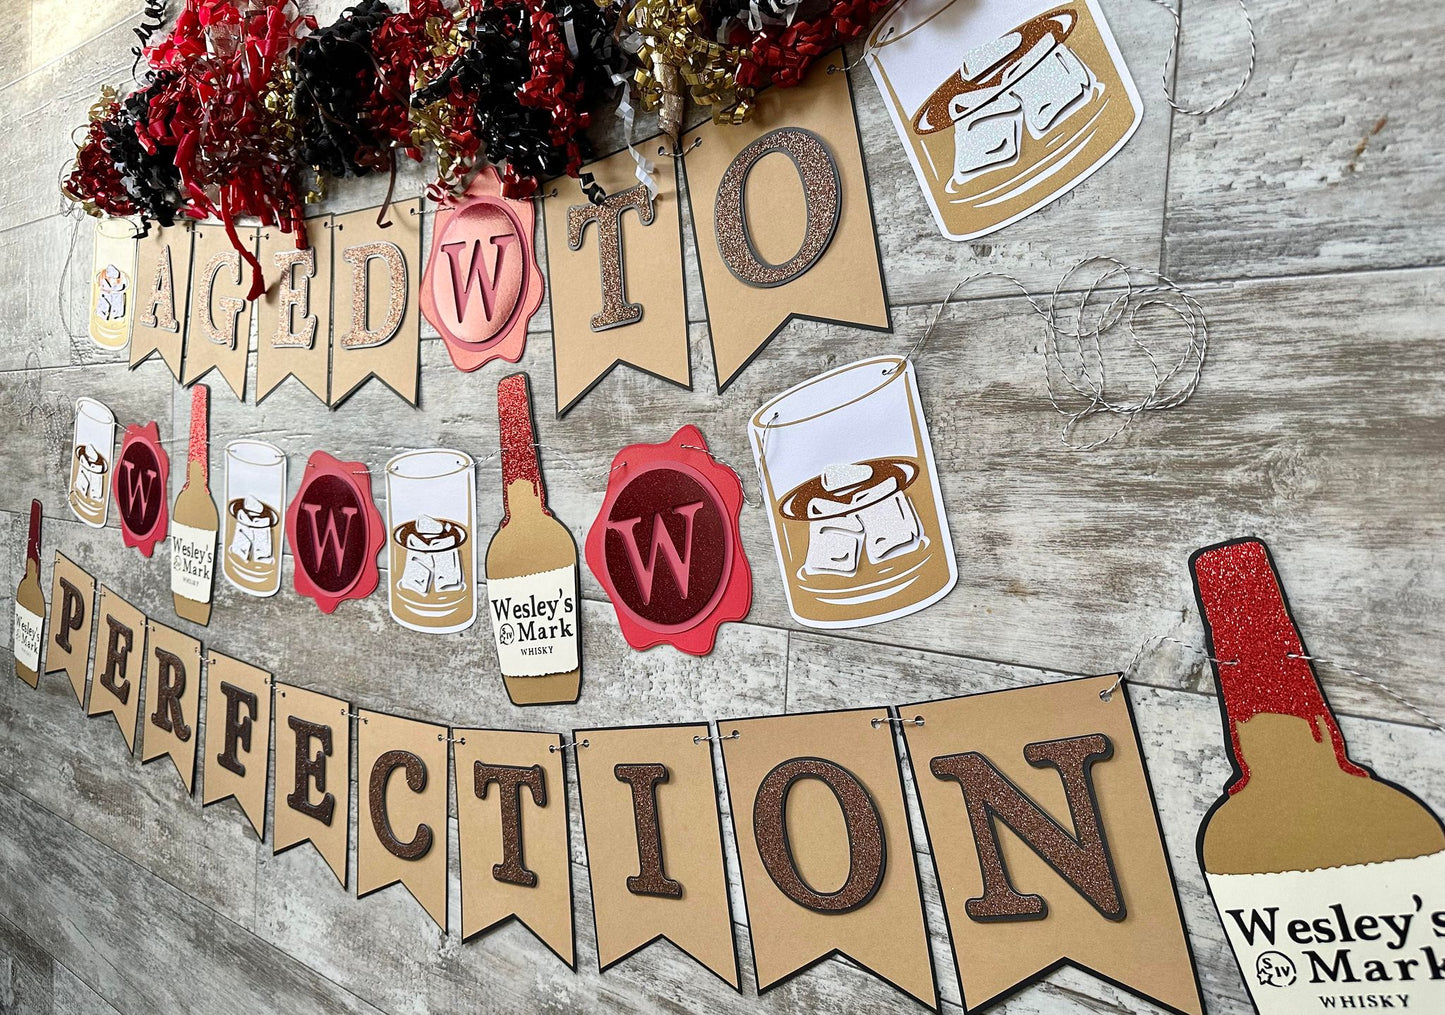 Aged To Perfection Whiskey 40th 50th 60th 70th Birthday Party Banner